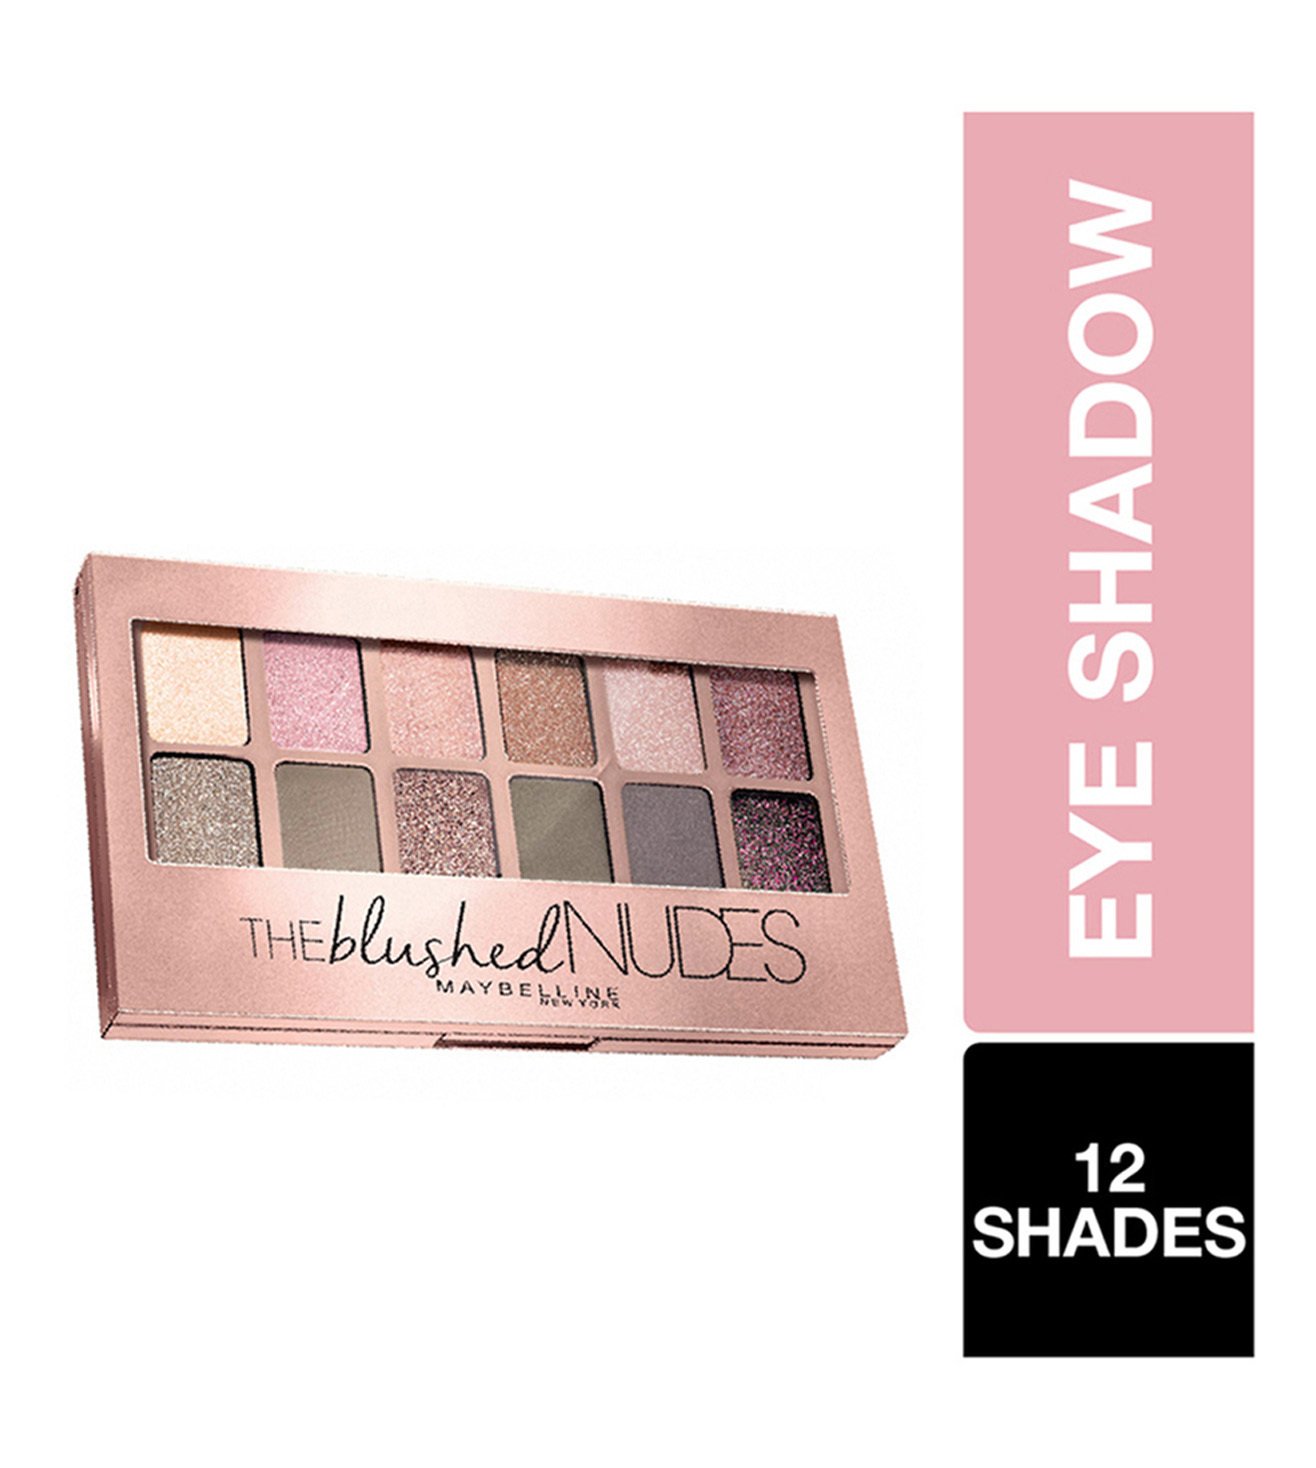 Nudes Tata Palette Palette, York Maybelline On Buy Shadow 9gm Eye The CLiQ New Blushed Online